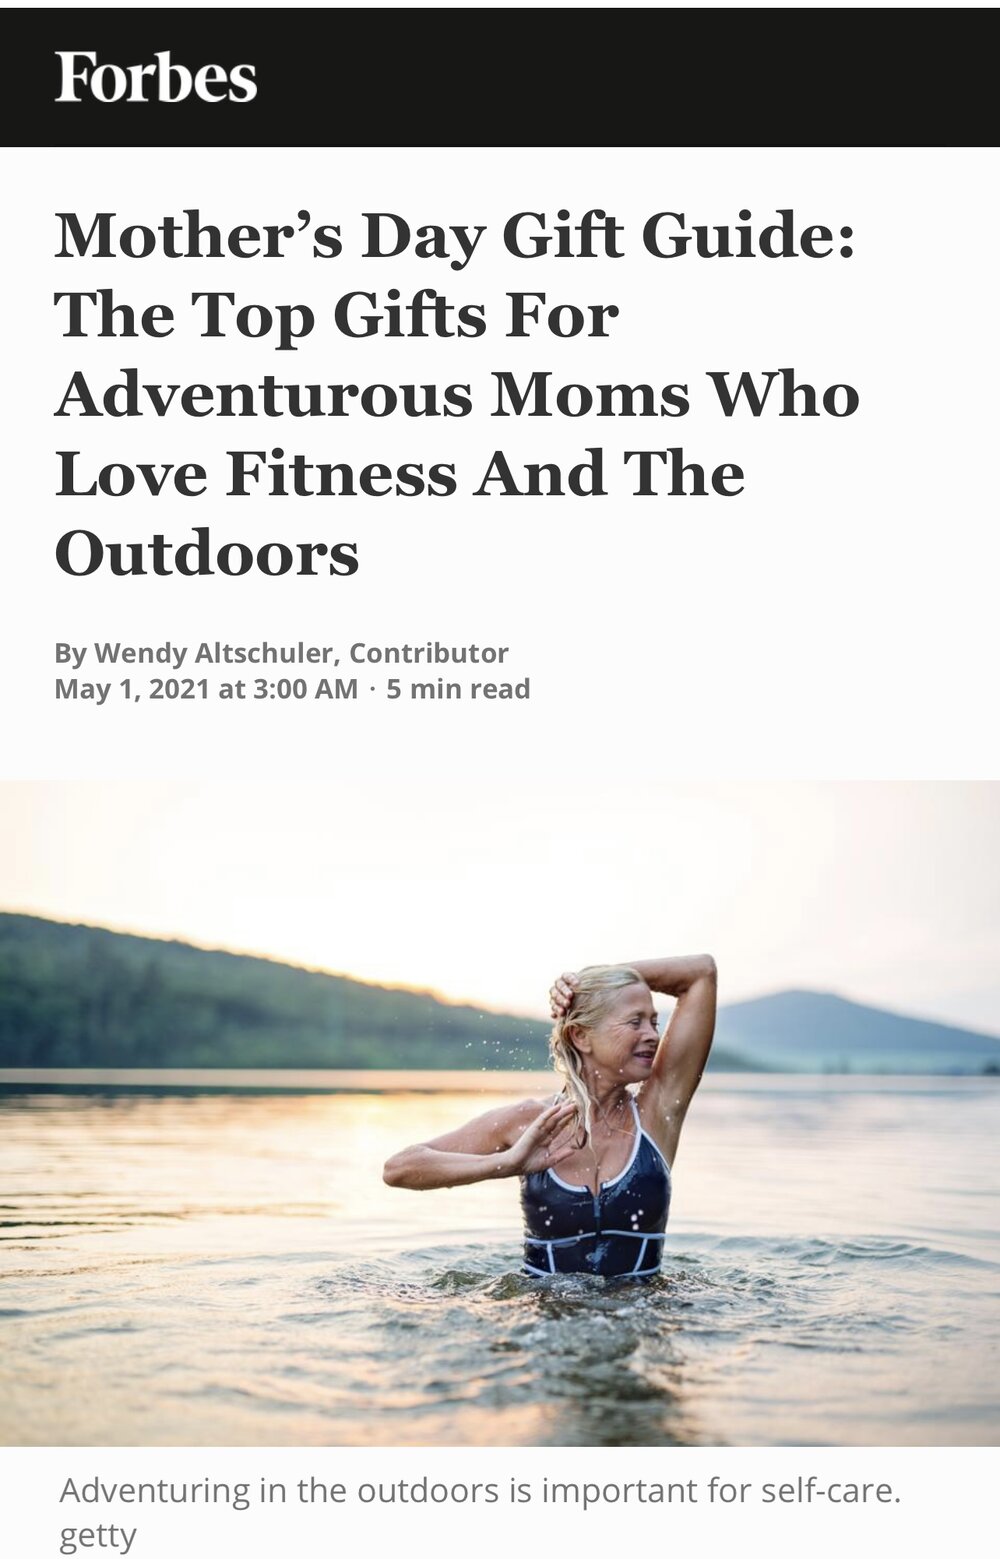 Mother’s Day Gift Guide: The Top Gifts For Adventurous Moms Who Love Fitness And The Outdoors